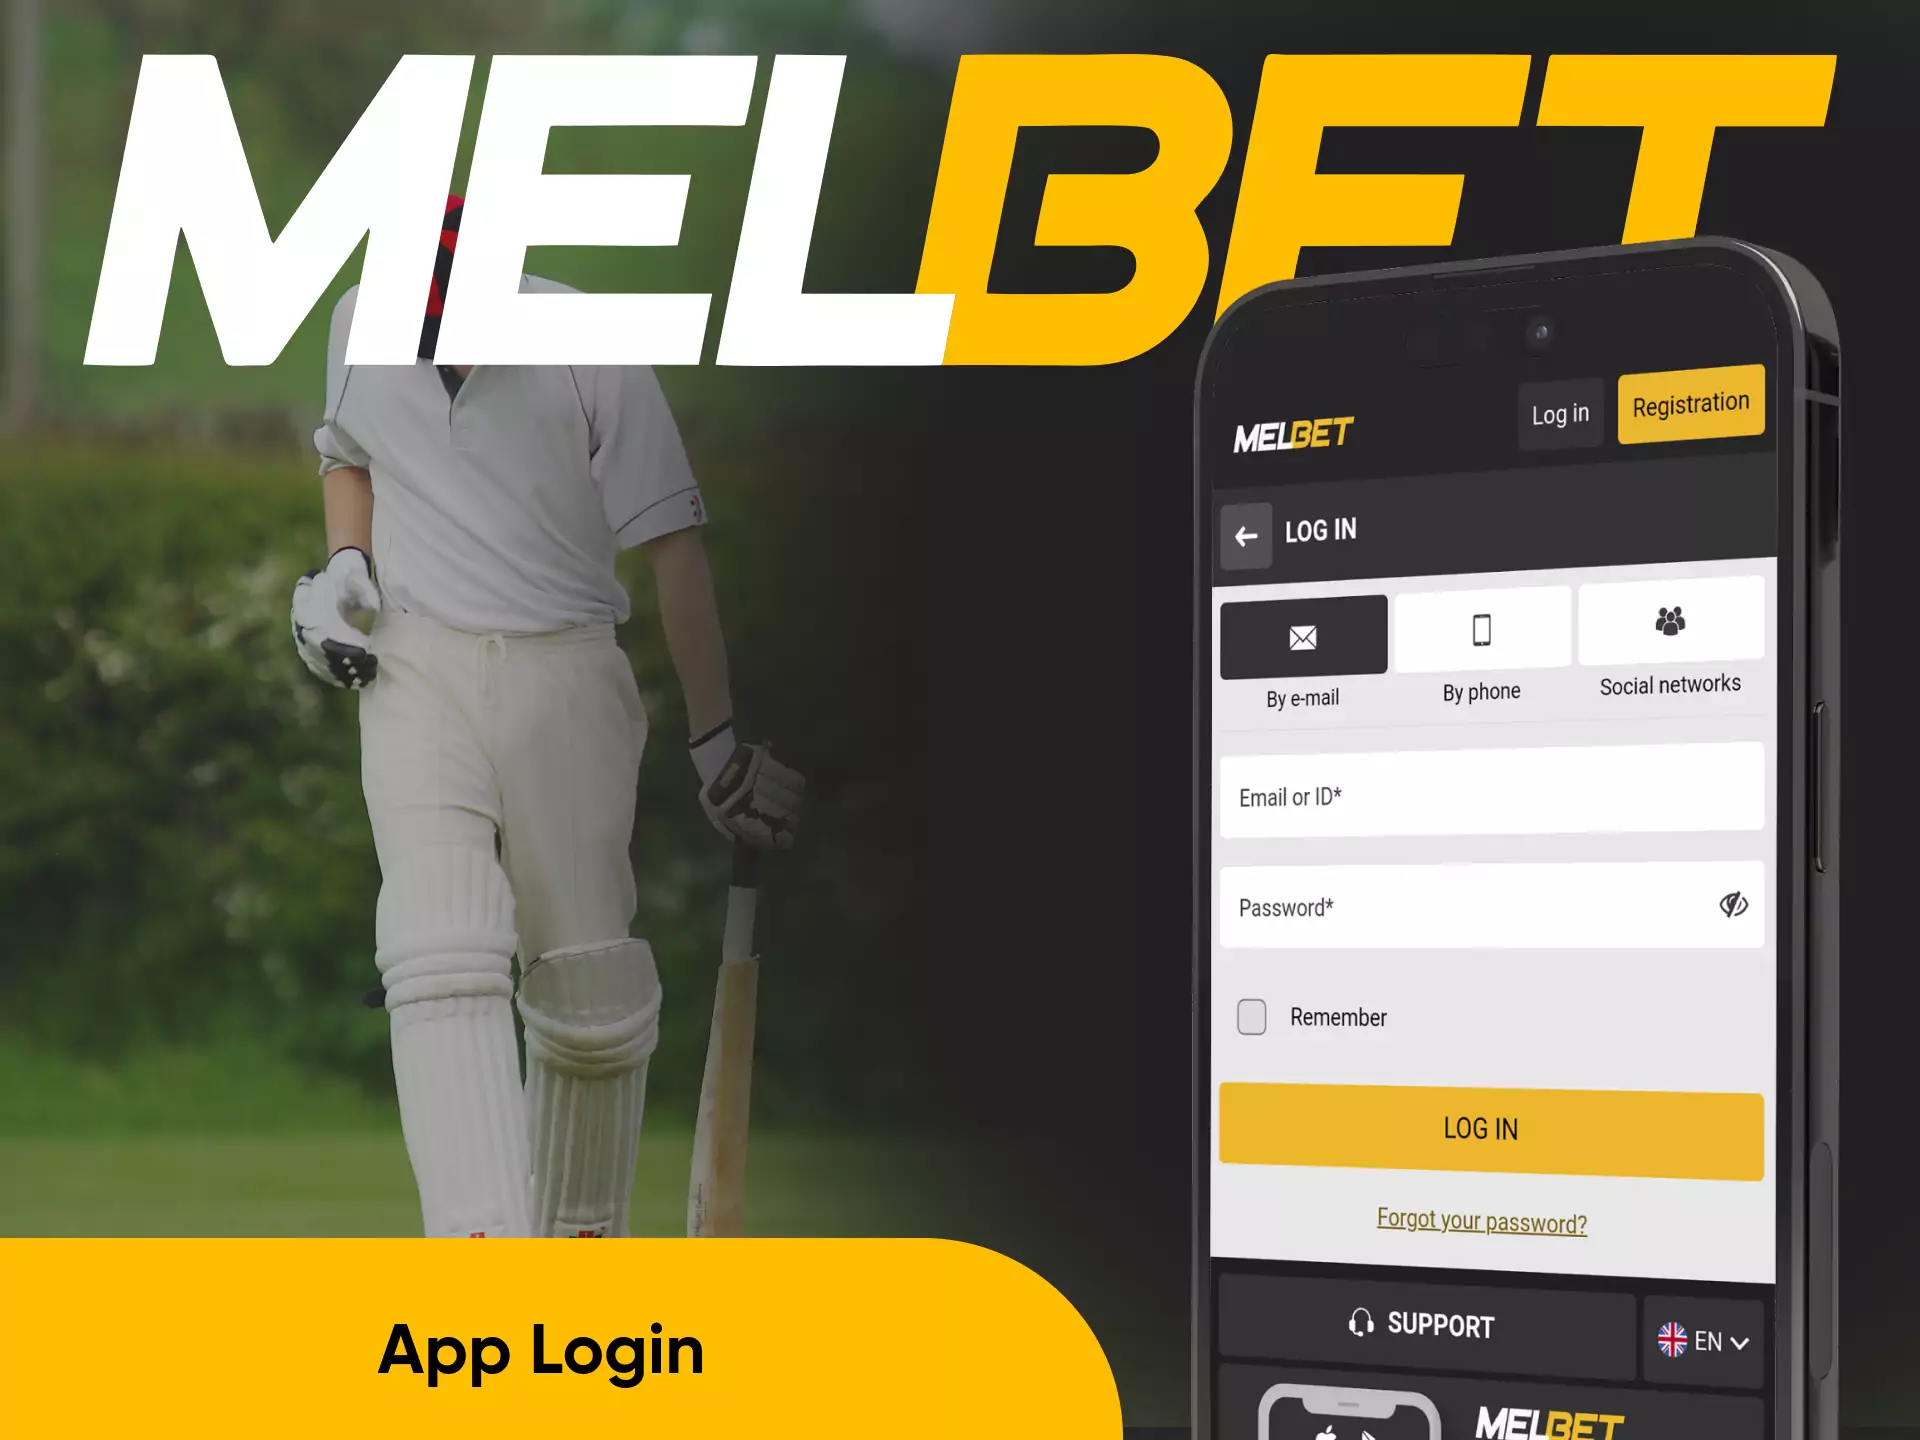 Log into the Melbet app to get access to entertainment.